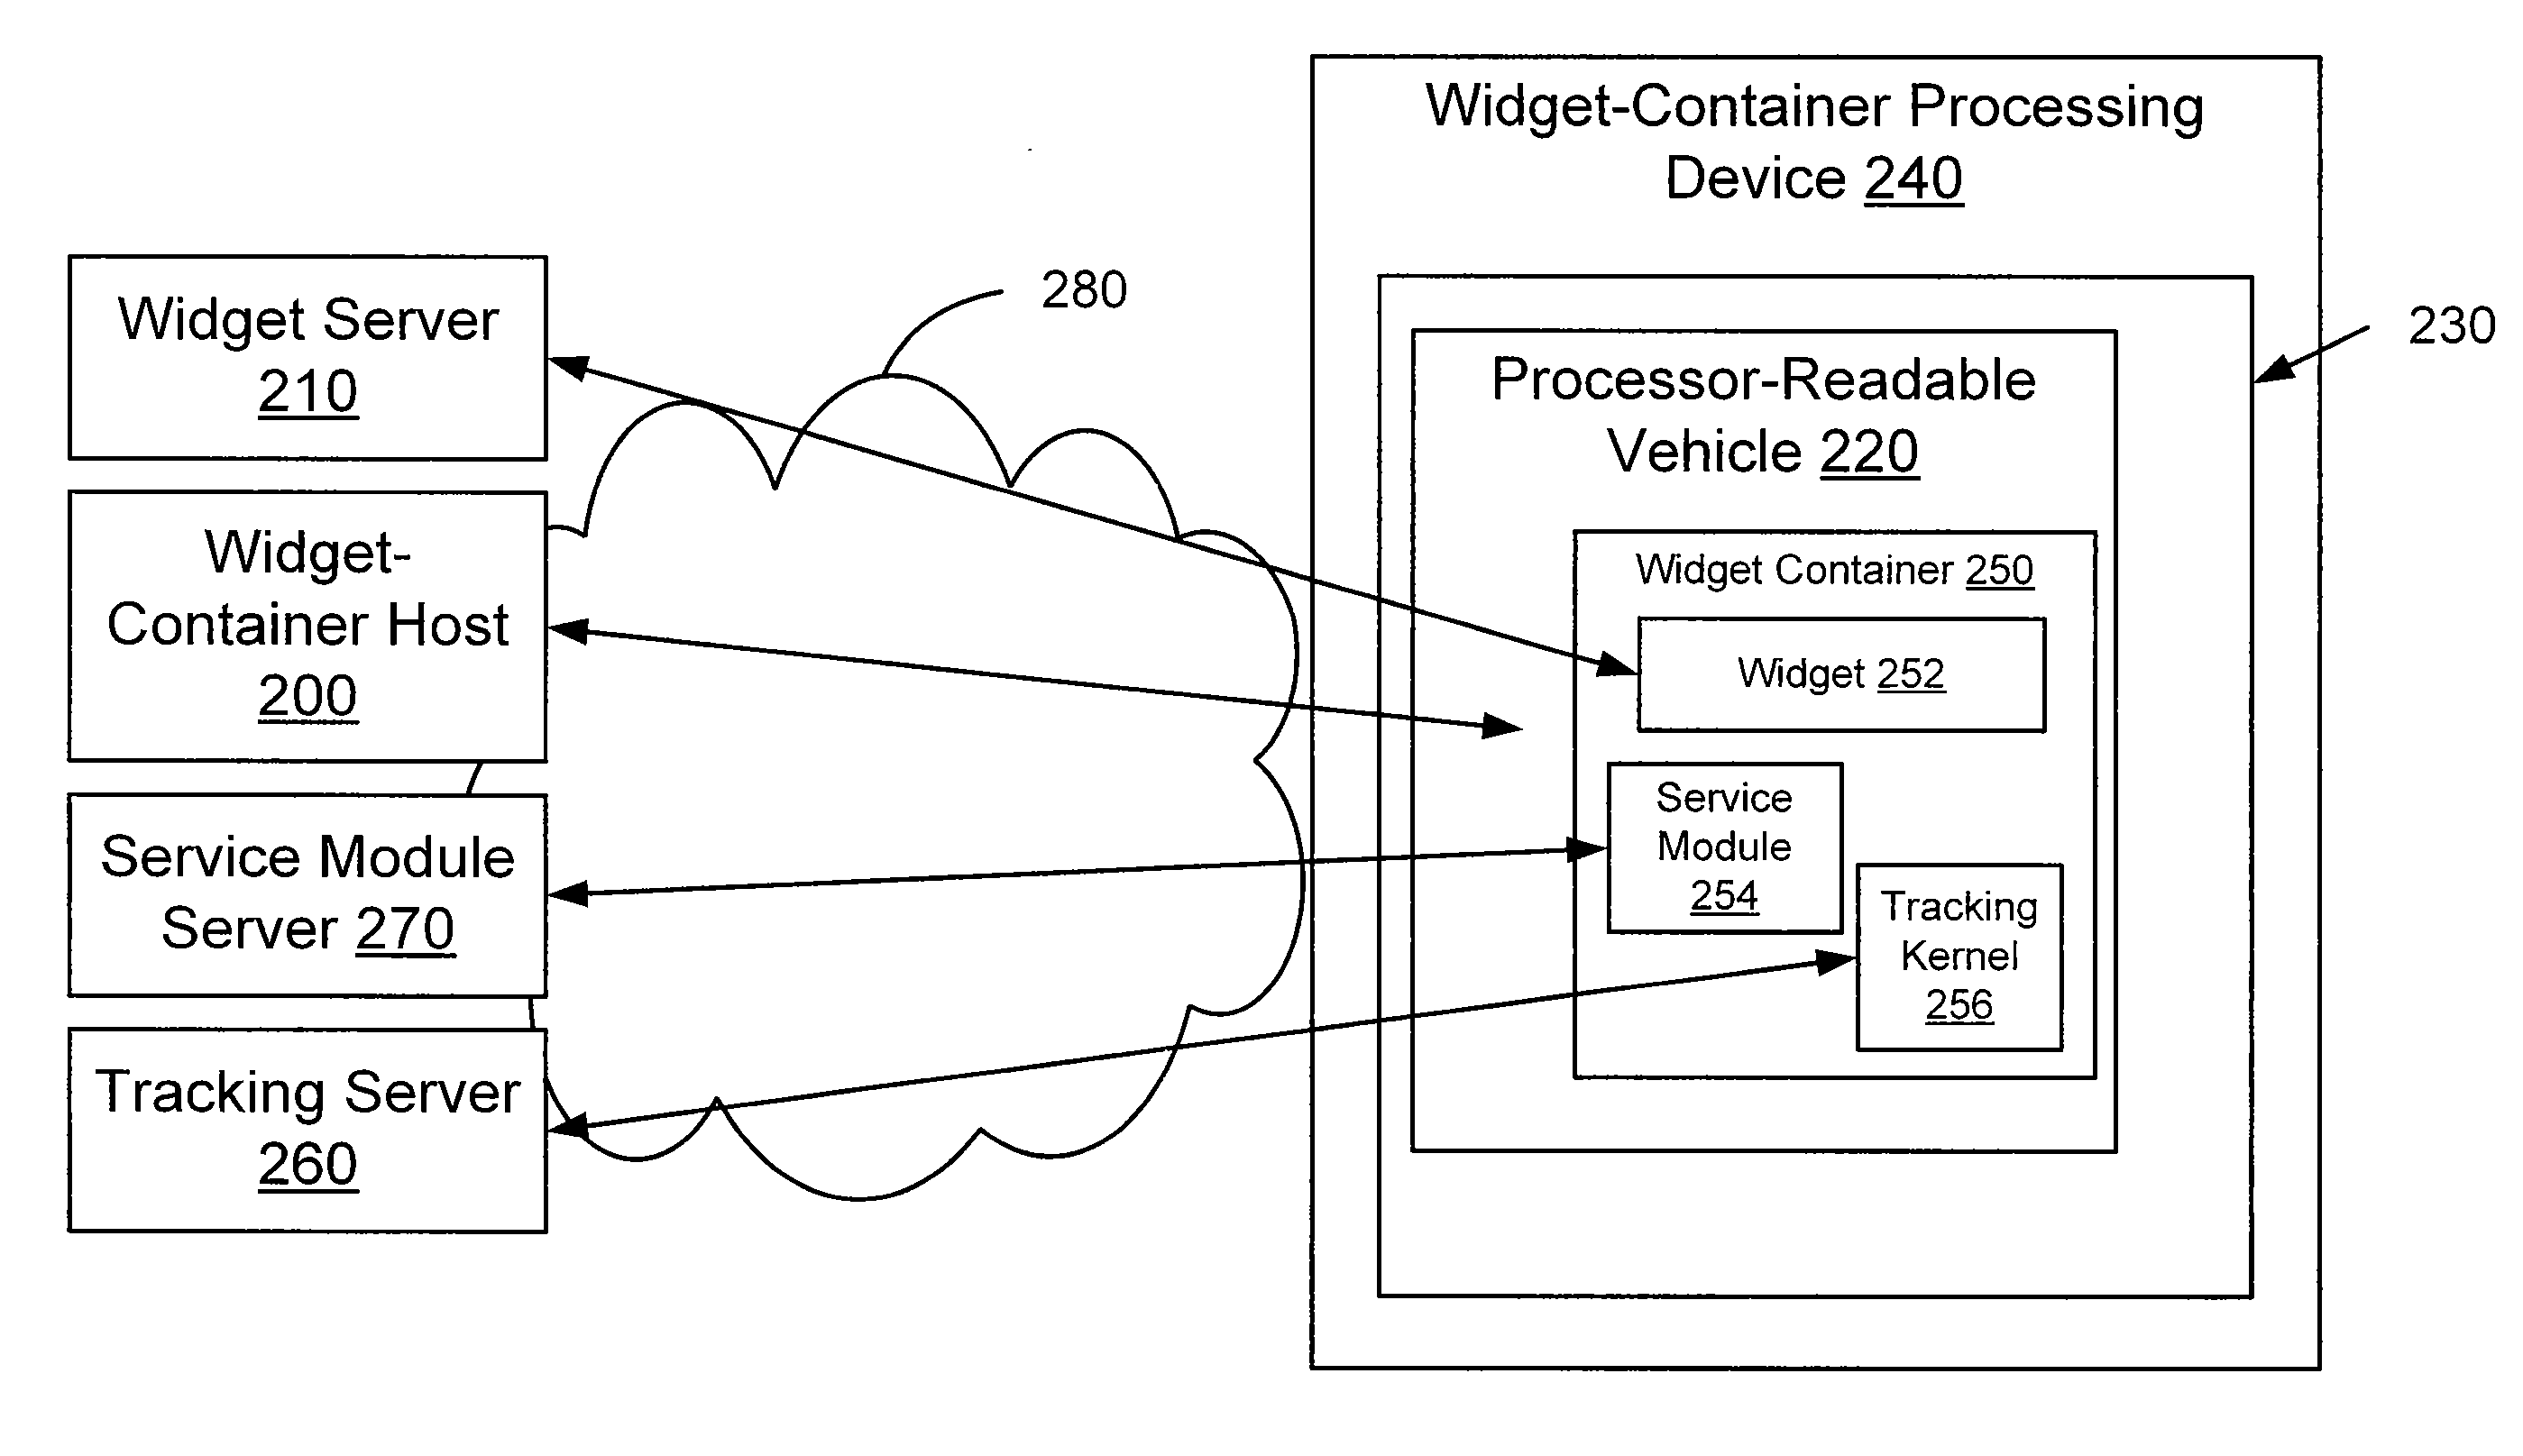 Method and Apparatus for Widget-Container Hosting and Generation